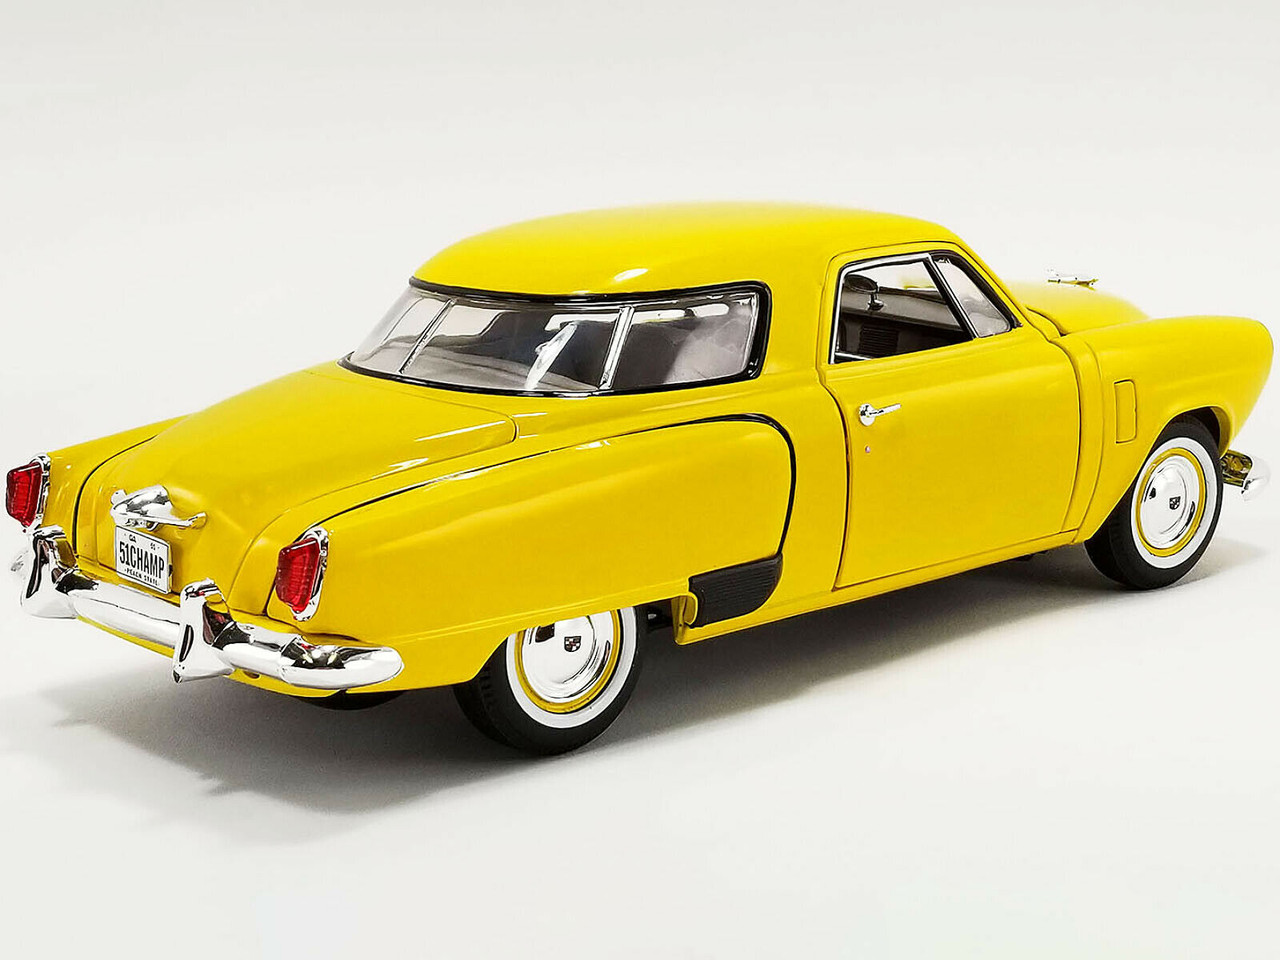 1/18 ACME 1951 Studebaker Champion  (Solar Yellow) Diecast Car Model Limited 500 Pieces